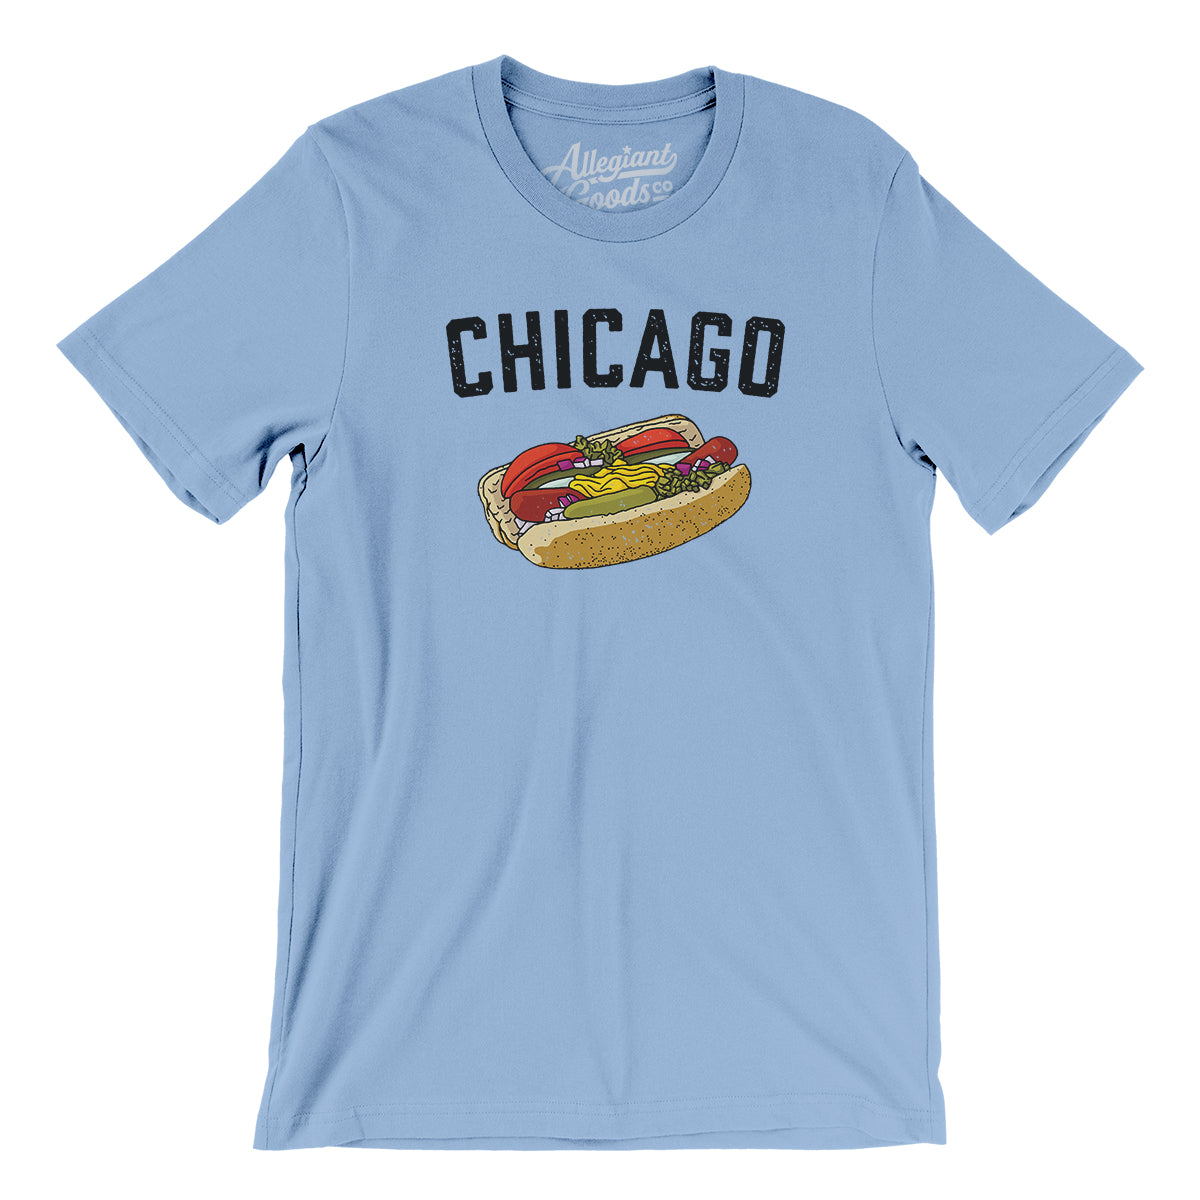 Chicago Cubs Here For The Hotdogs Shirt - Limotees